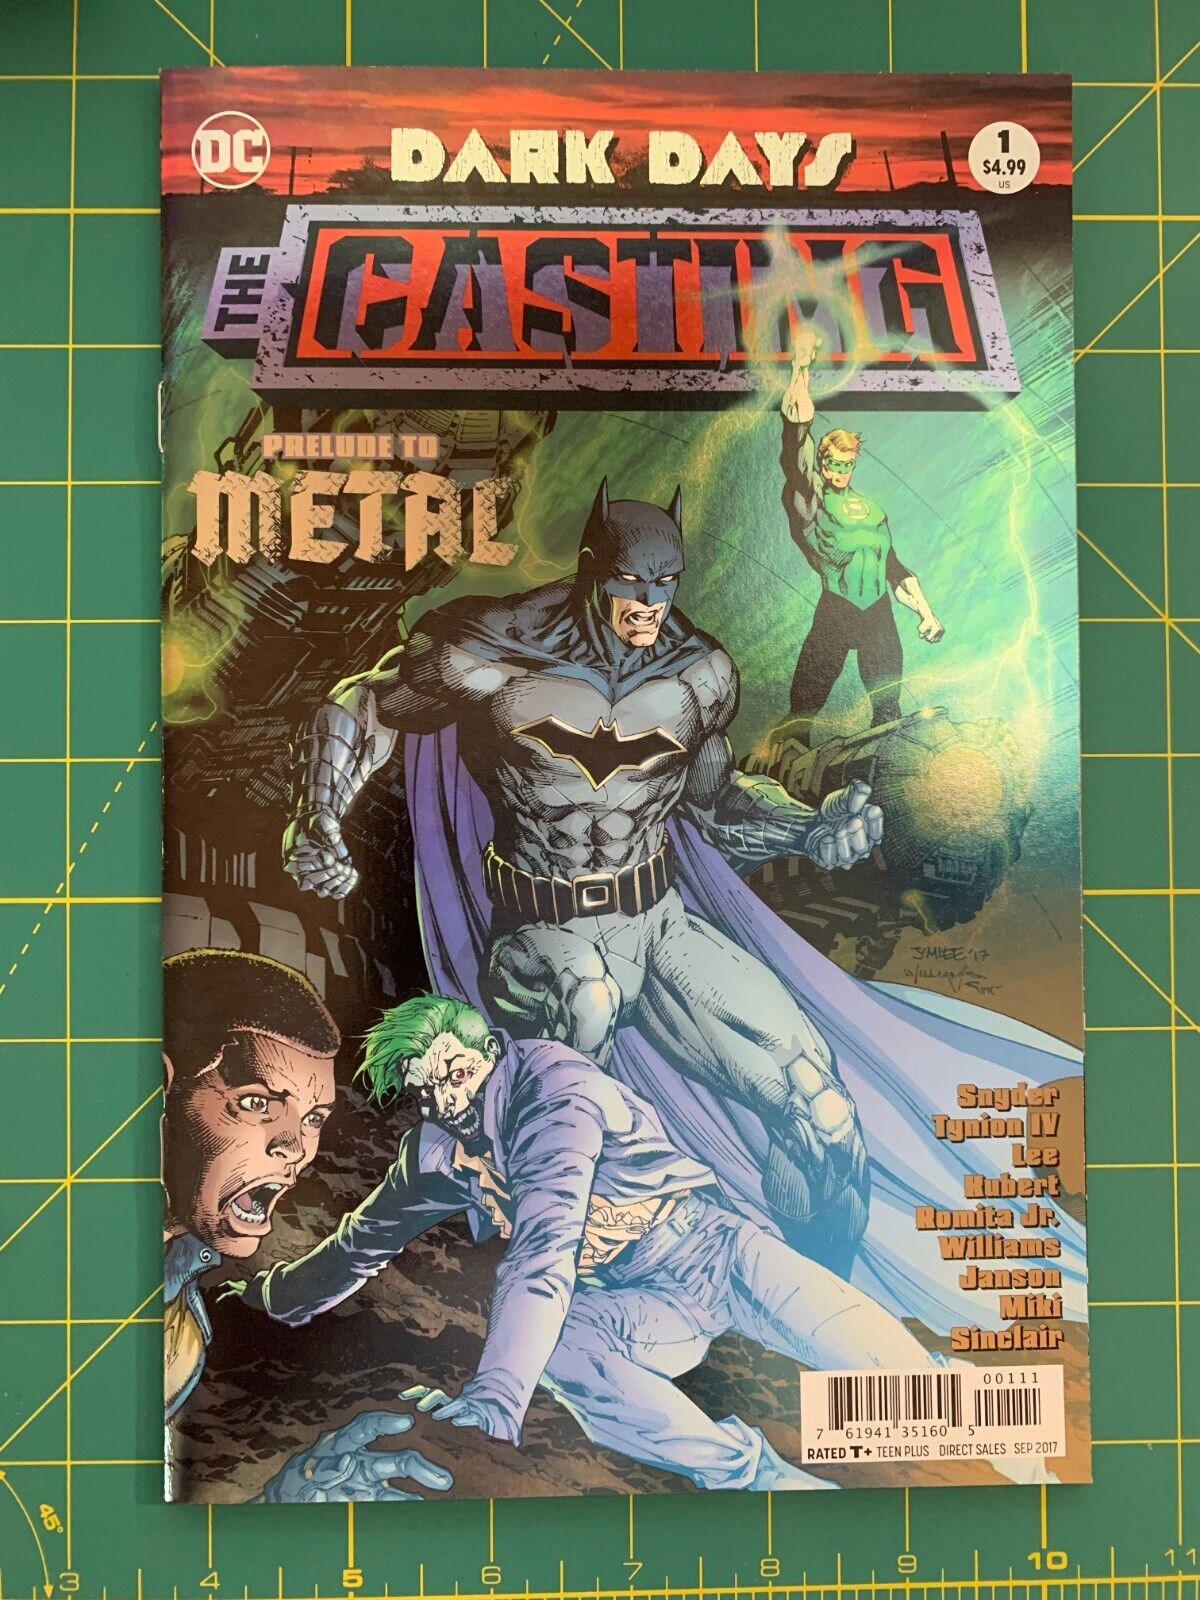 Dark Days The Casting #1 - Sep 2017 - Foil Stamped Cover      (6305)